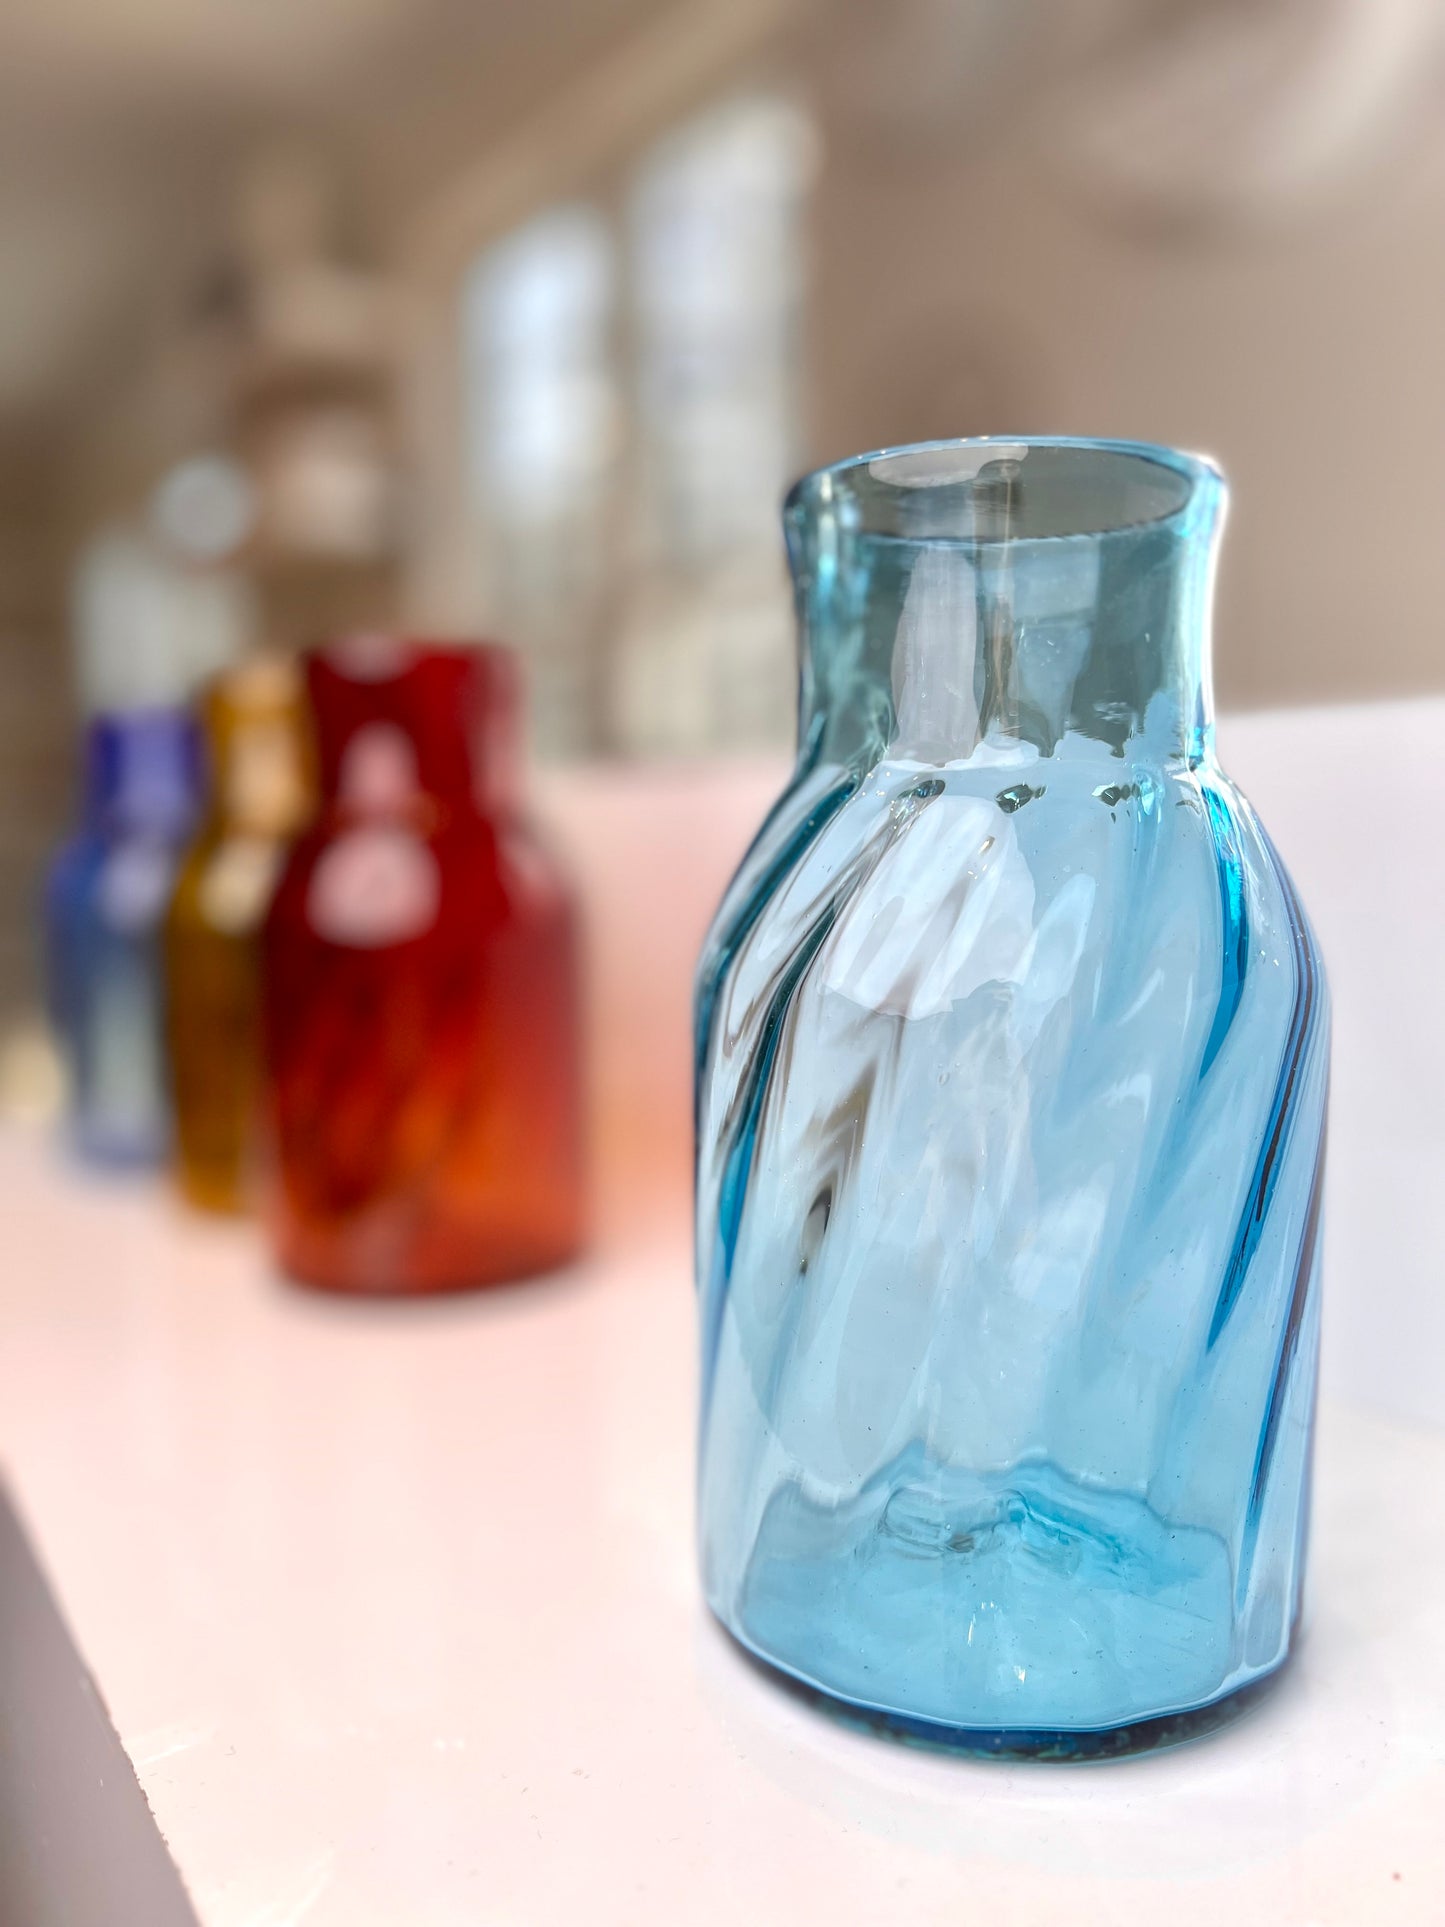 Colorful Glass Vase